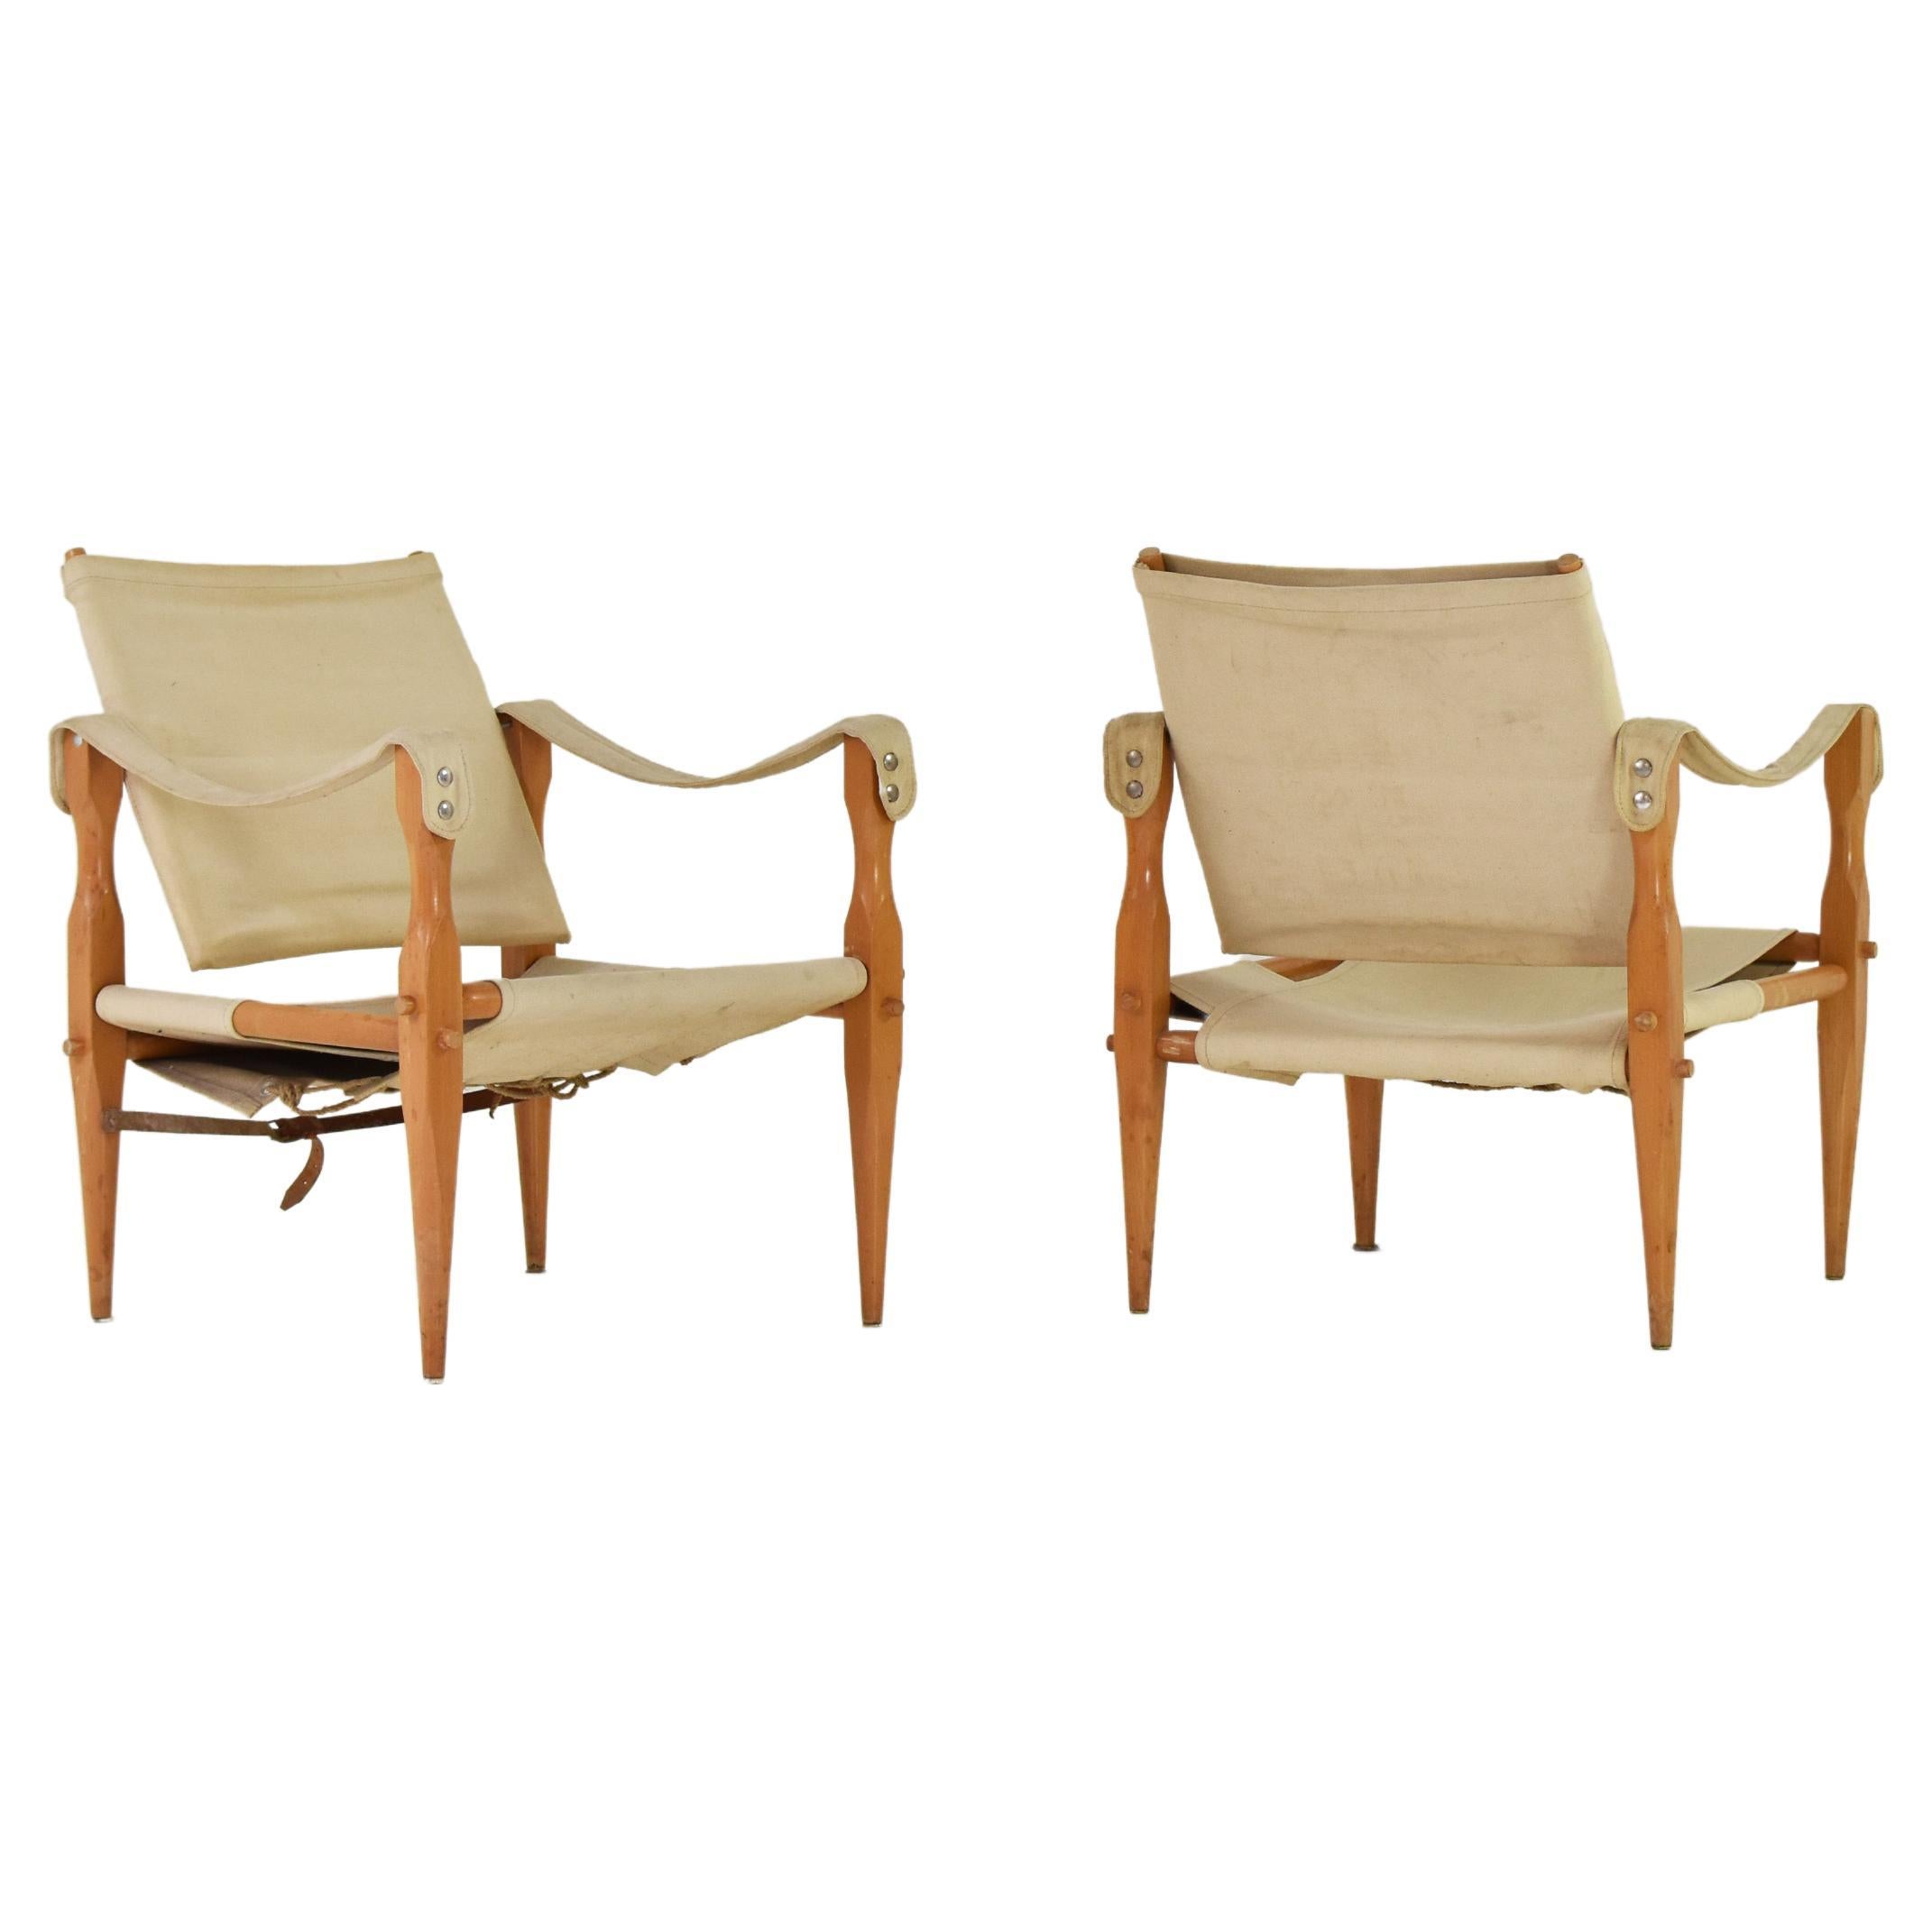 Set of Two ‘Safari’ Lounge Chairs from Denmark, Produced in the 1960’s